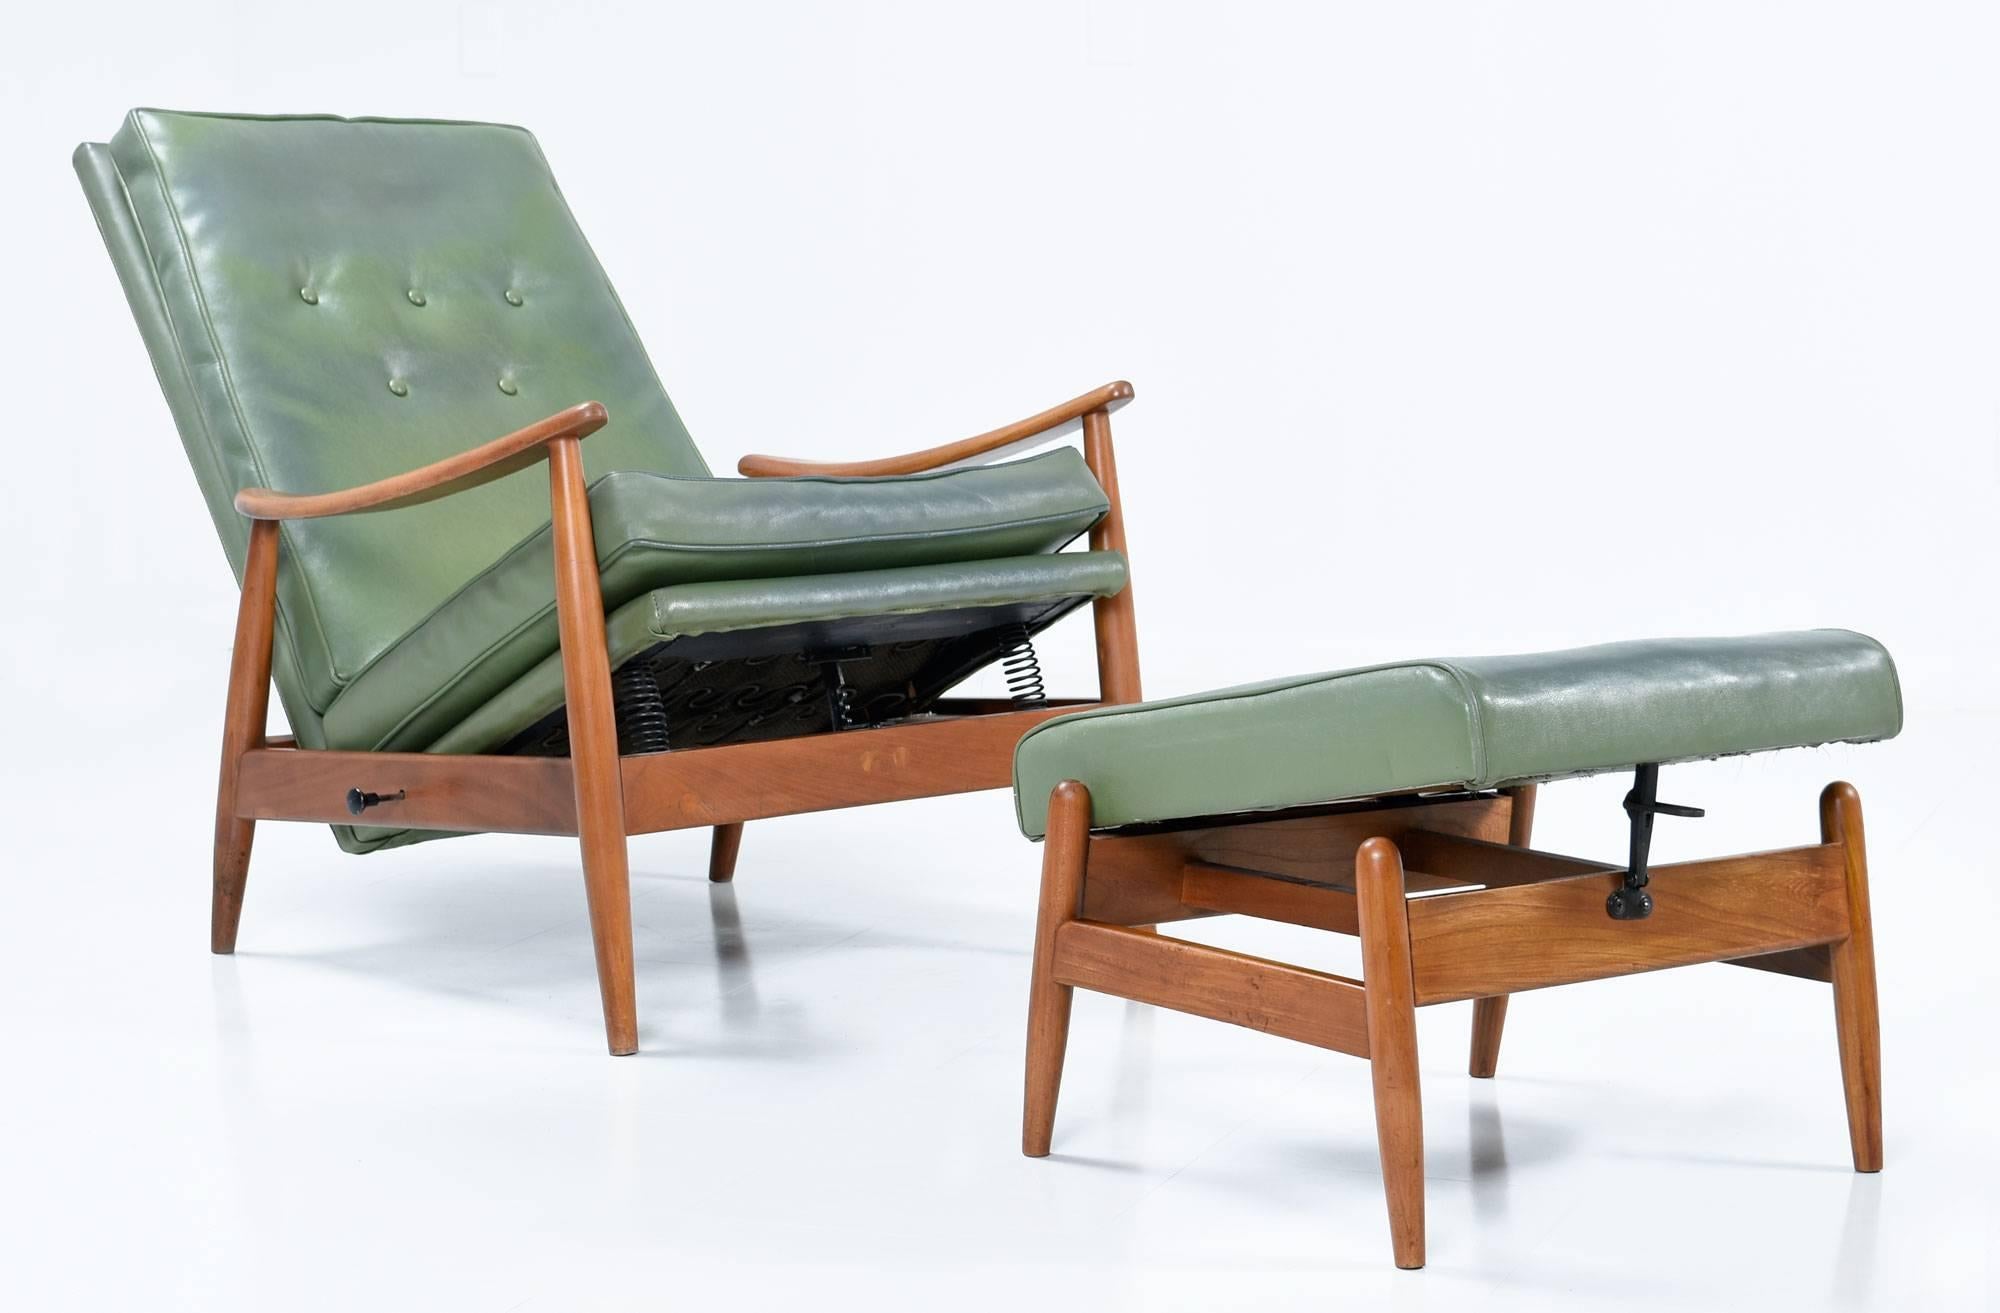 Early Milo Baughman Mid-Century Modern recliner for James Inc. All original! This is a true recliner with manual control on the side to regulate the chair position. Ottoman can also incline or lie flat. Green vinyl upholstery is original. James Inc.